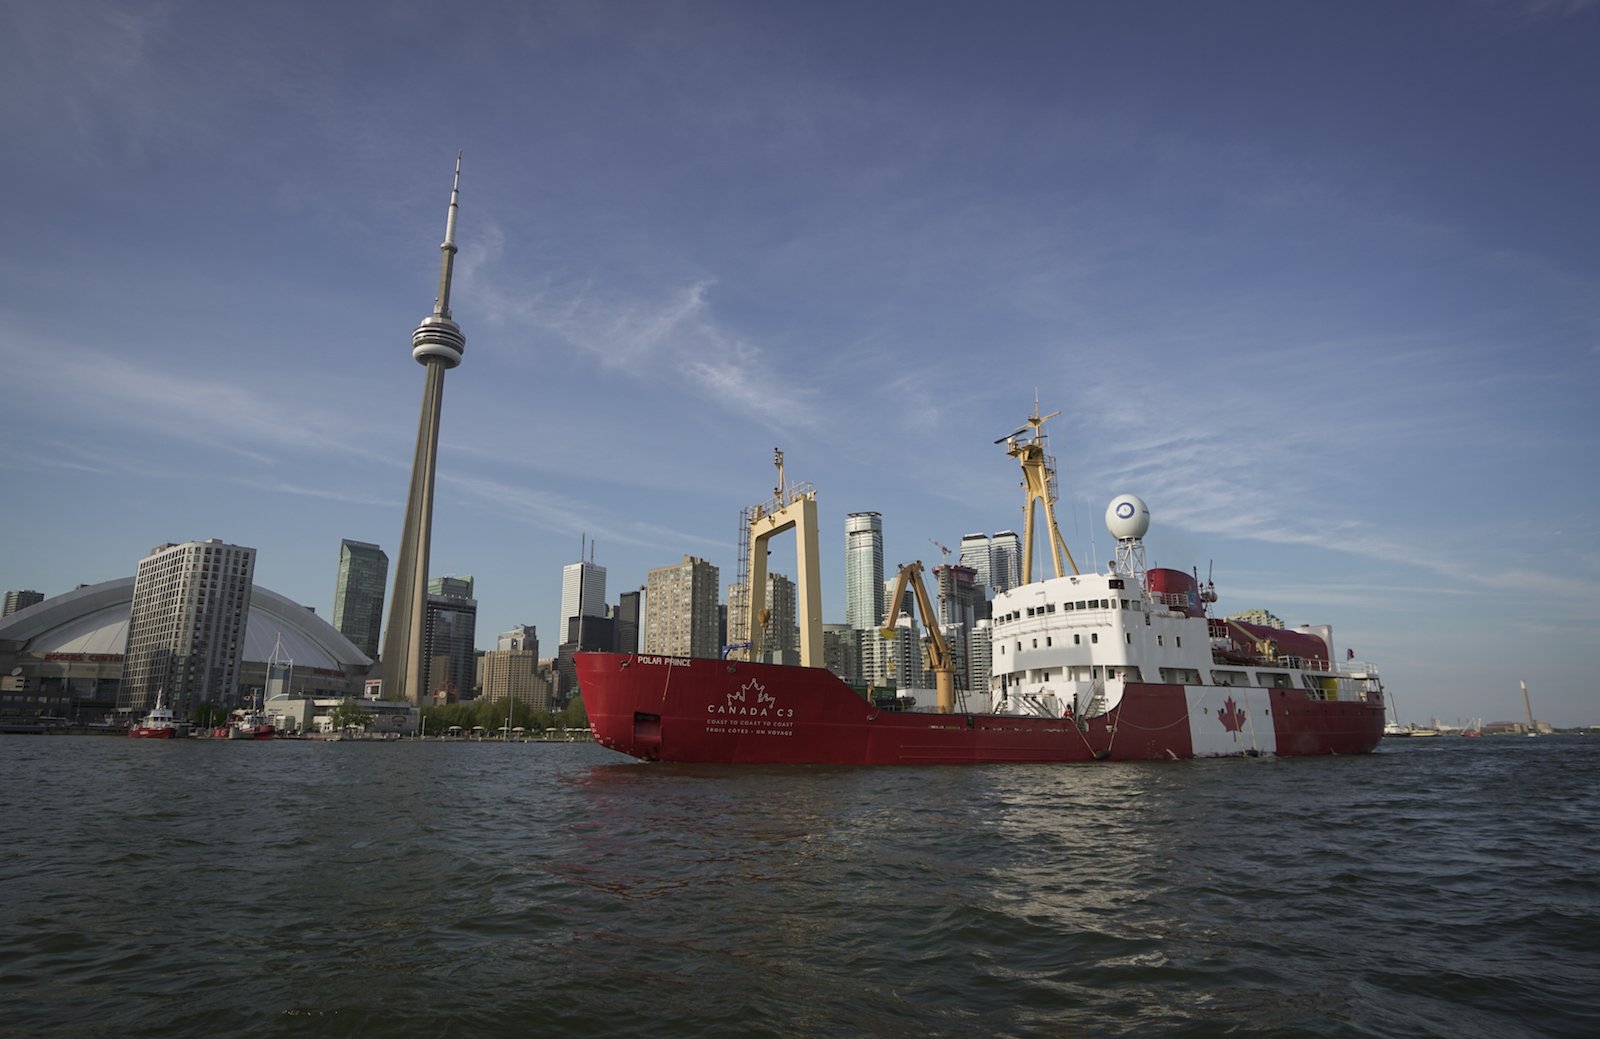 The C3 Expedition ship at its departure point, Toronto.